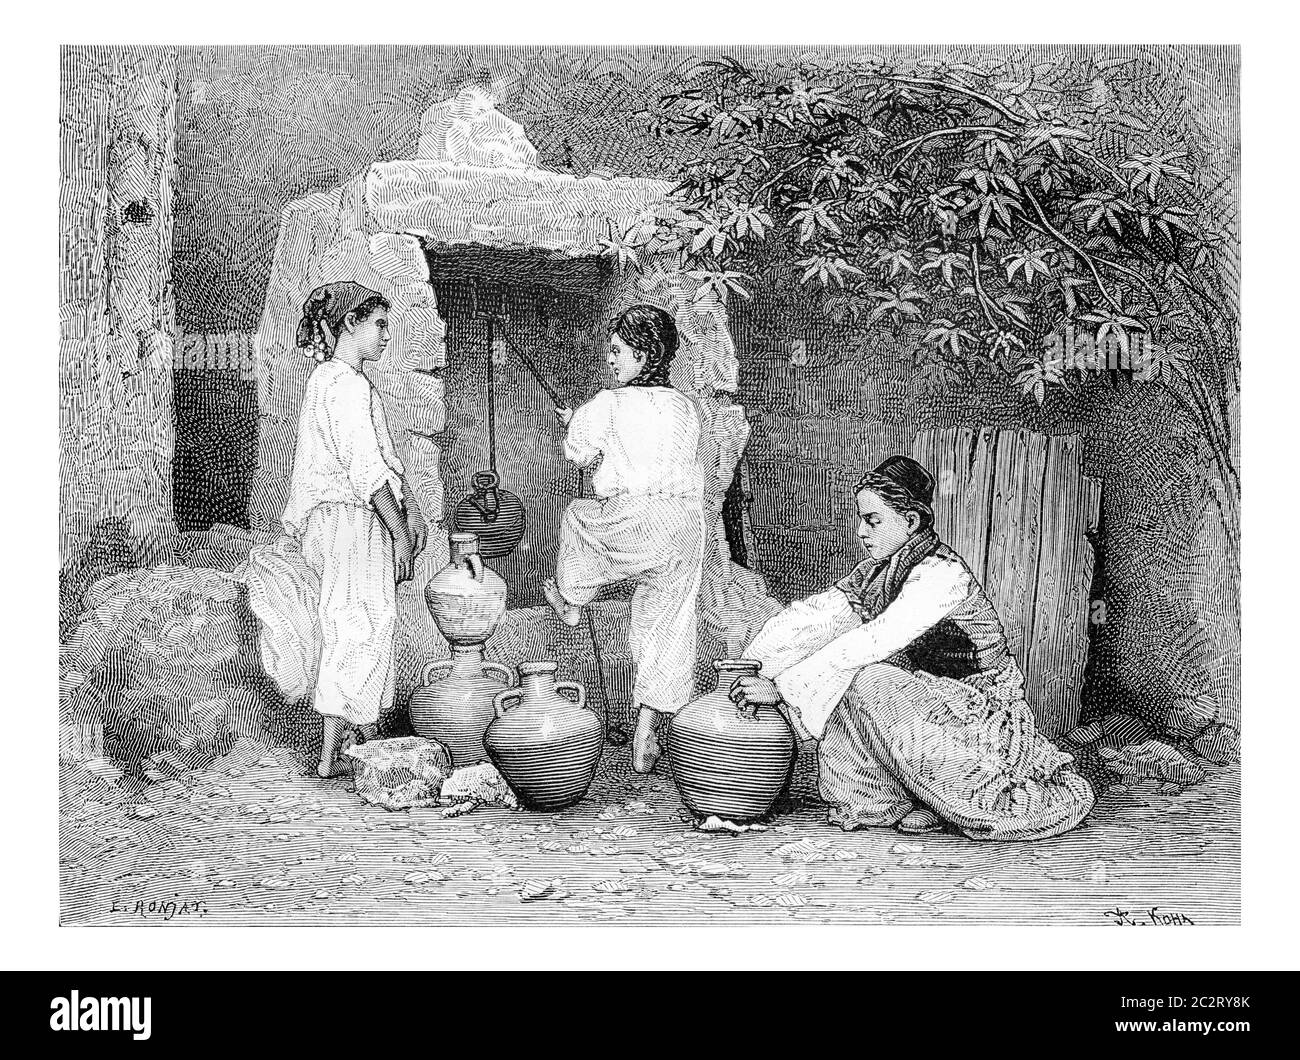 Arab Girls Drawing Water from a Well in Acre, Israel, vintage engraved illustration. Le Tour du Monde, Travel Journal, 1881 Stock Photo